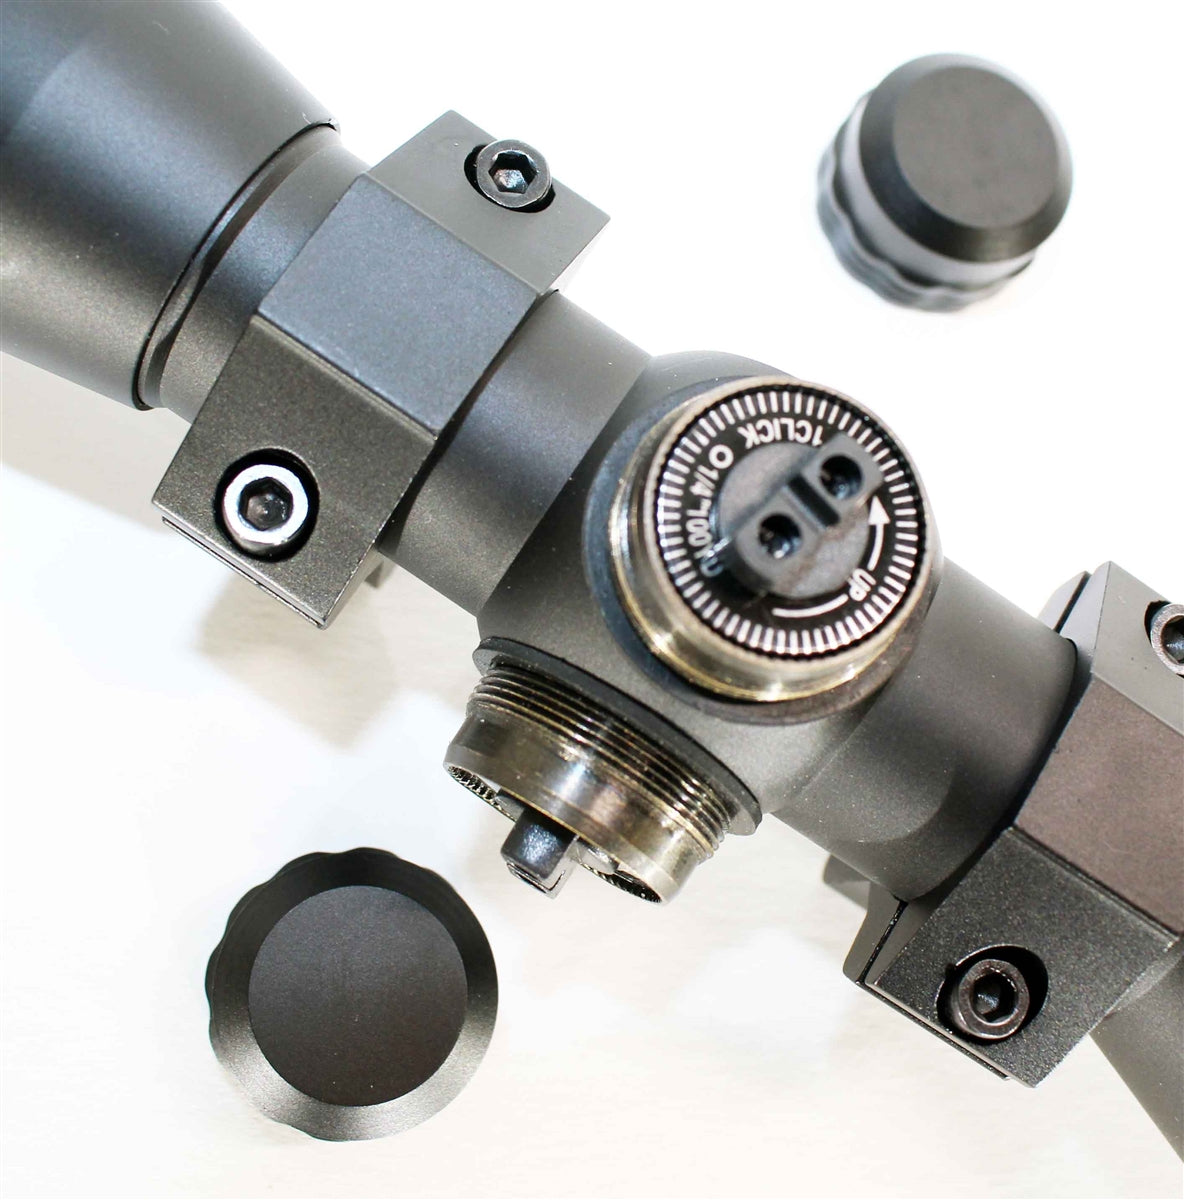 TRINITY 4x32 Mil-Dot Reticle Scope With Saddle Mount Compatible With Mossberg Maverick 88 12 Gauge Pump.